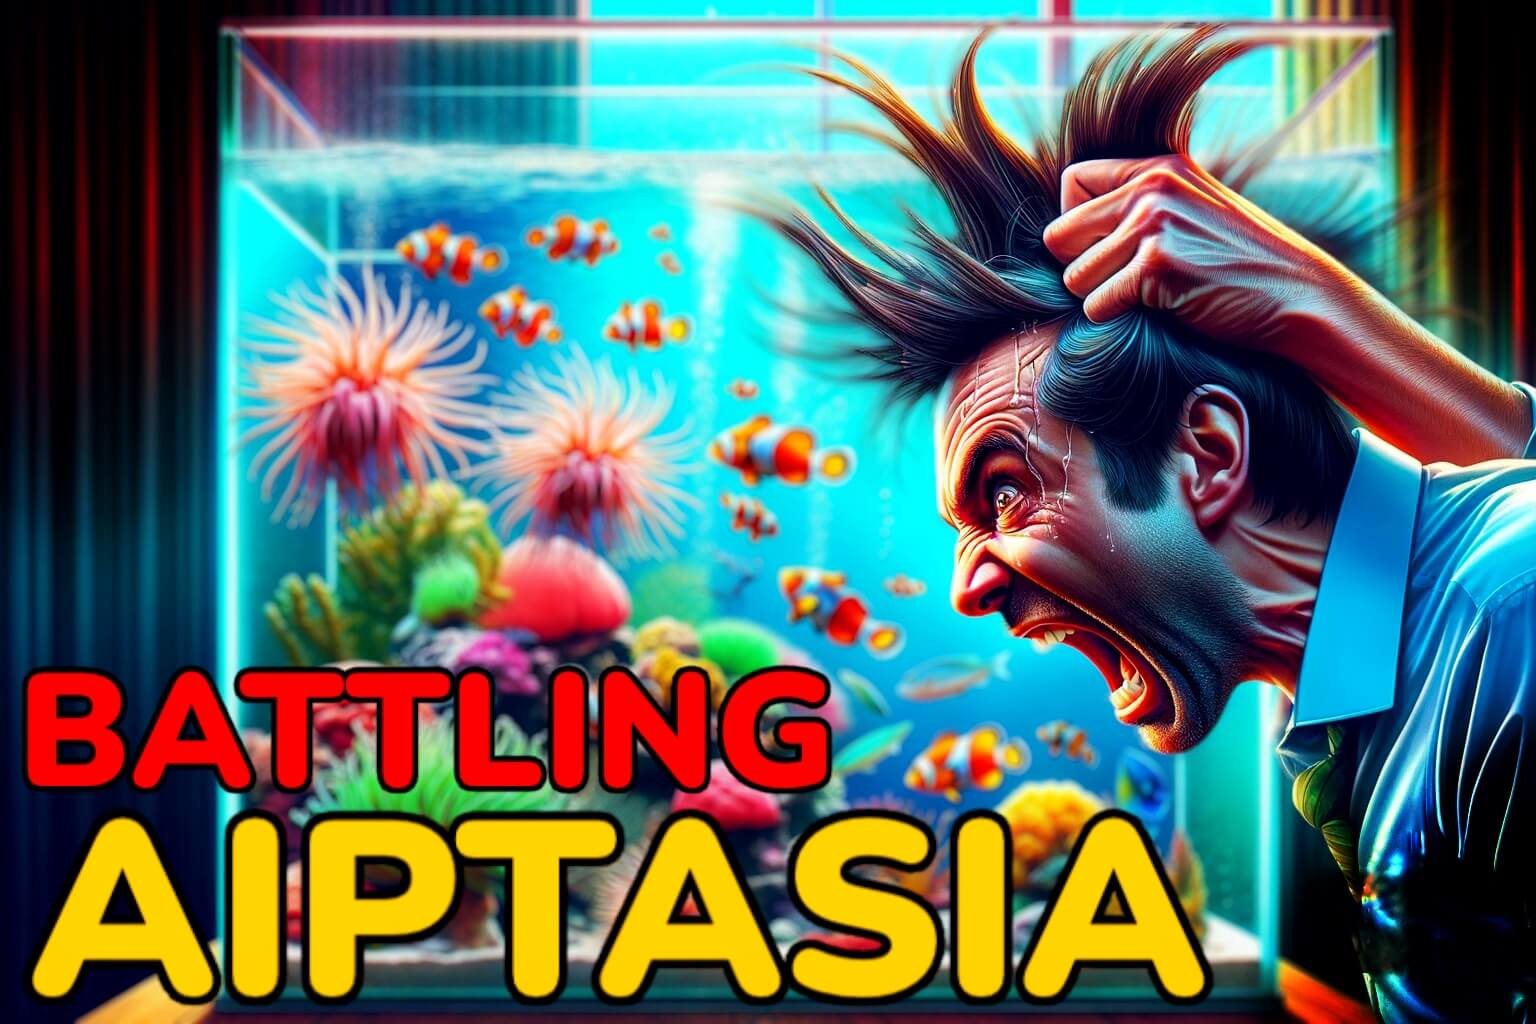 Battling Aiptasia: The Unwanted Guests of Marine Aquariums